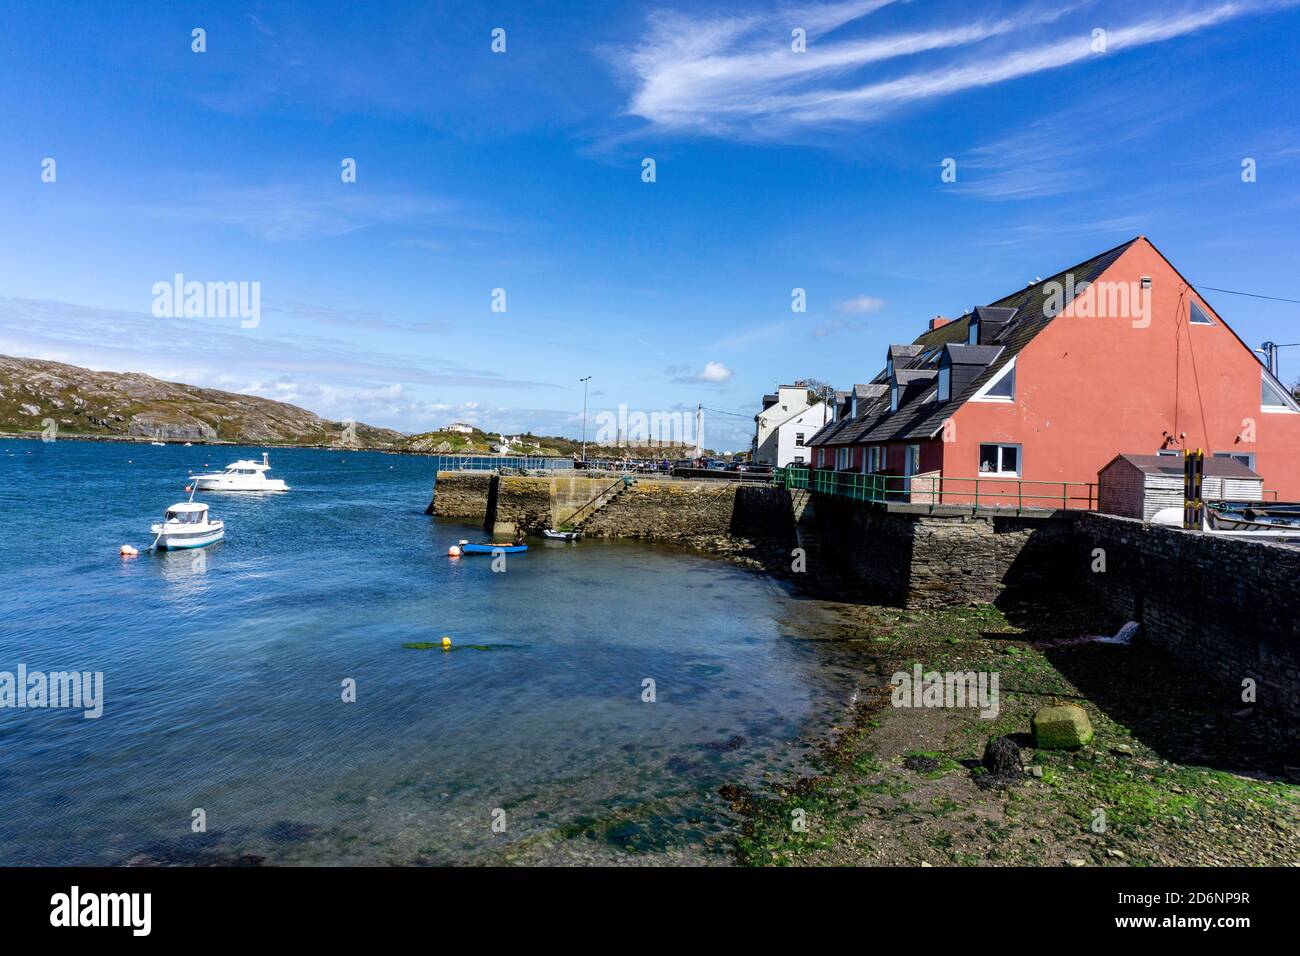 The harbour in the village of Crookhaven, County Cork, Ireland. Stock Photo